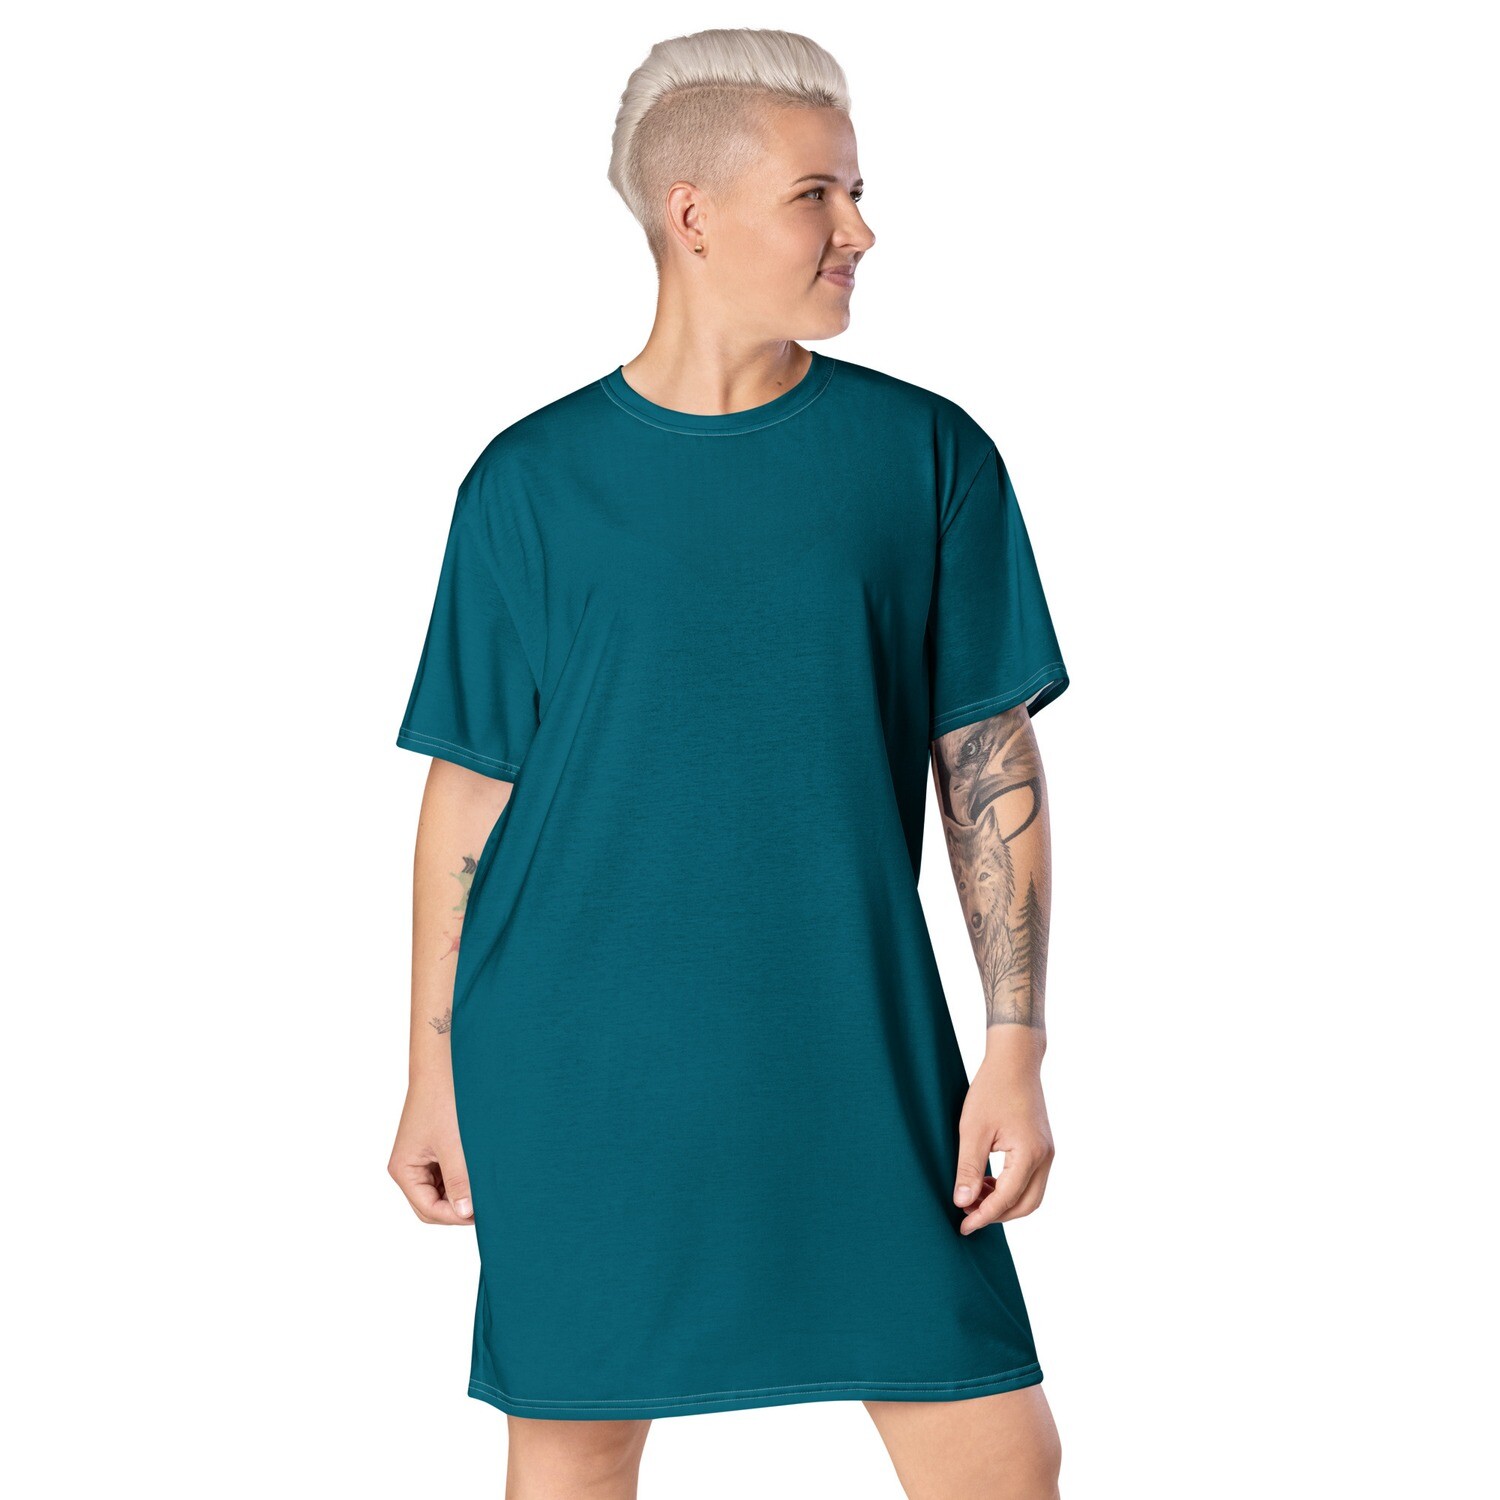 Dark turquoise baggy t-shirt dress in sizes 2XS-6XL